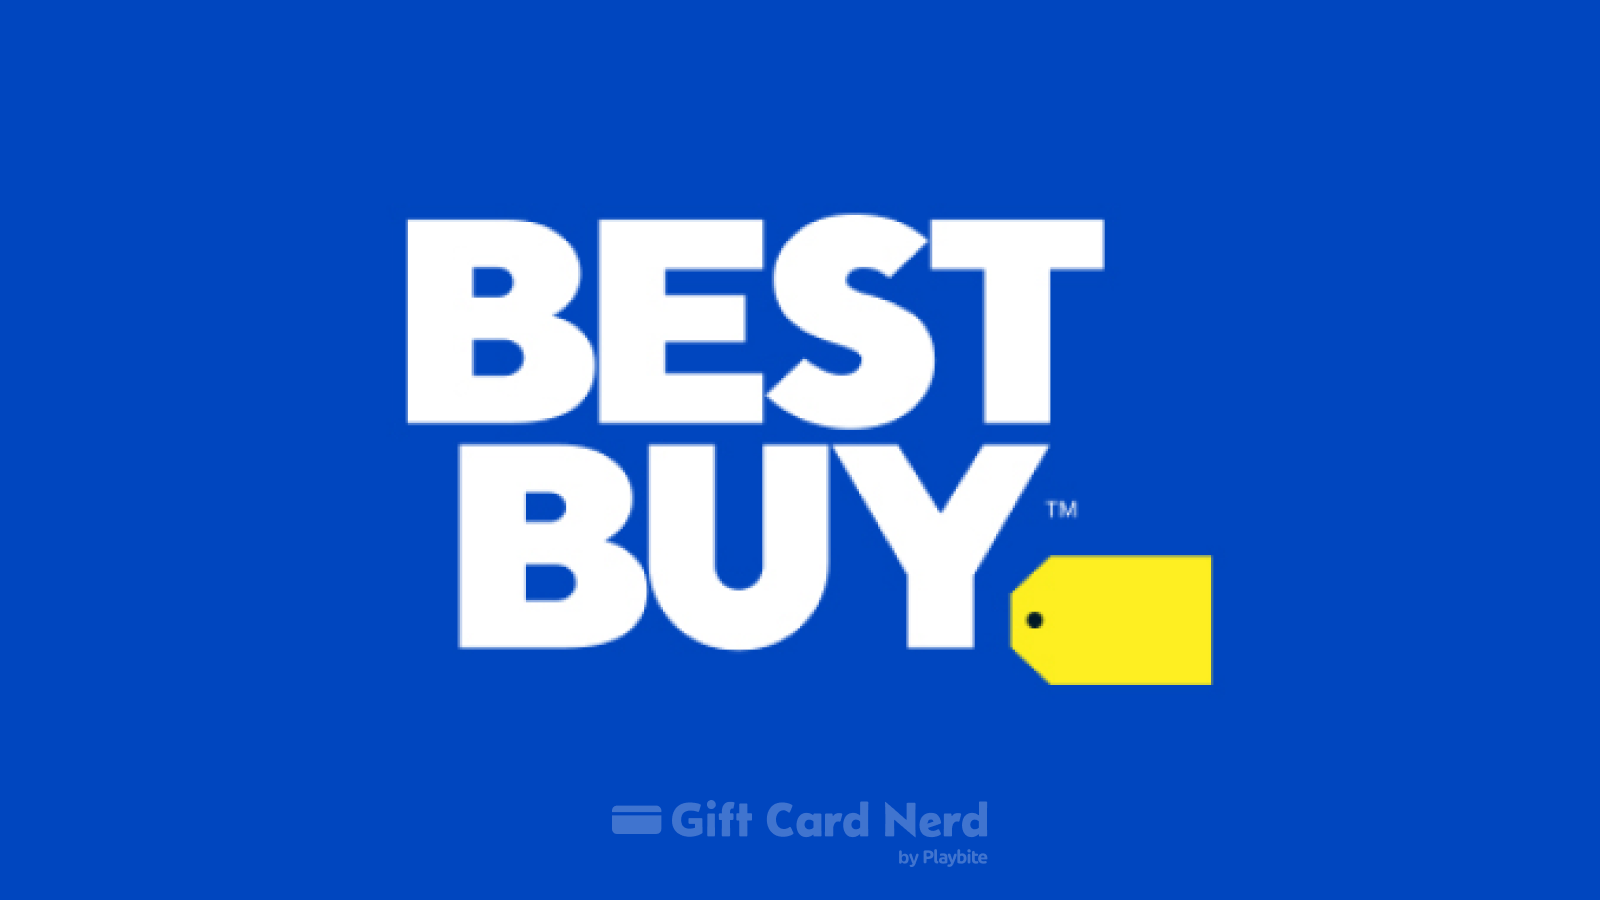 Can I Use a Best Buy Gift Card on DoorDash?